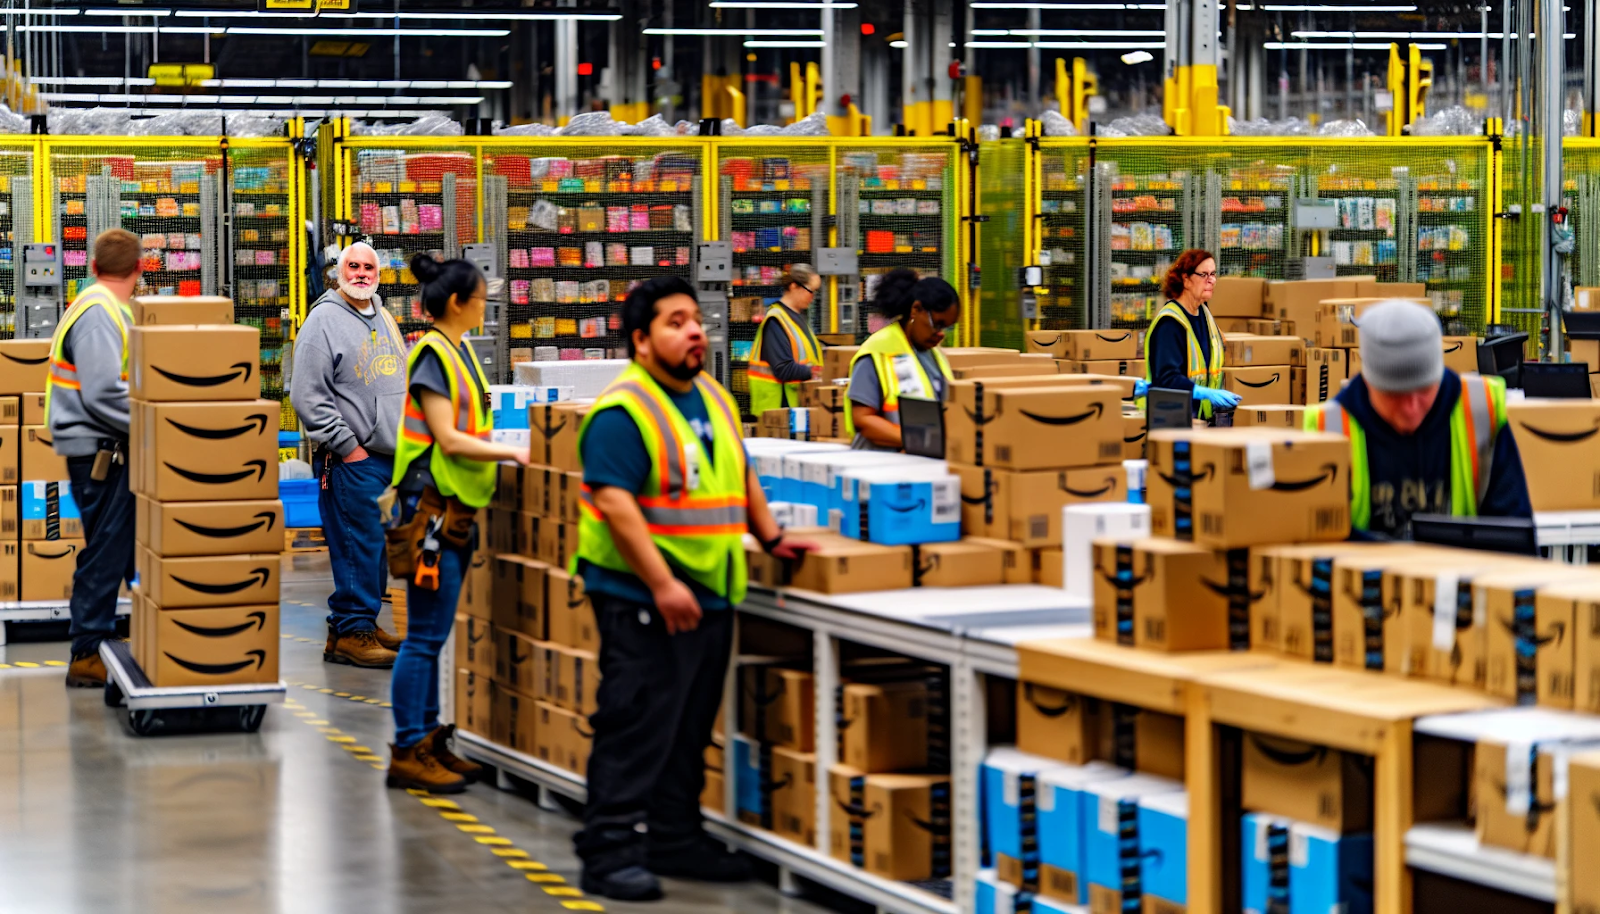 Amazon FBA fulfillment center with products ready for shipping